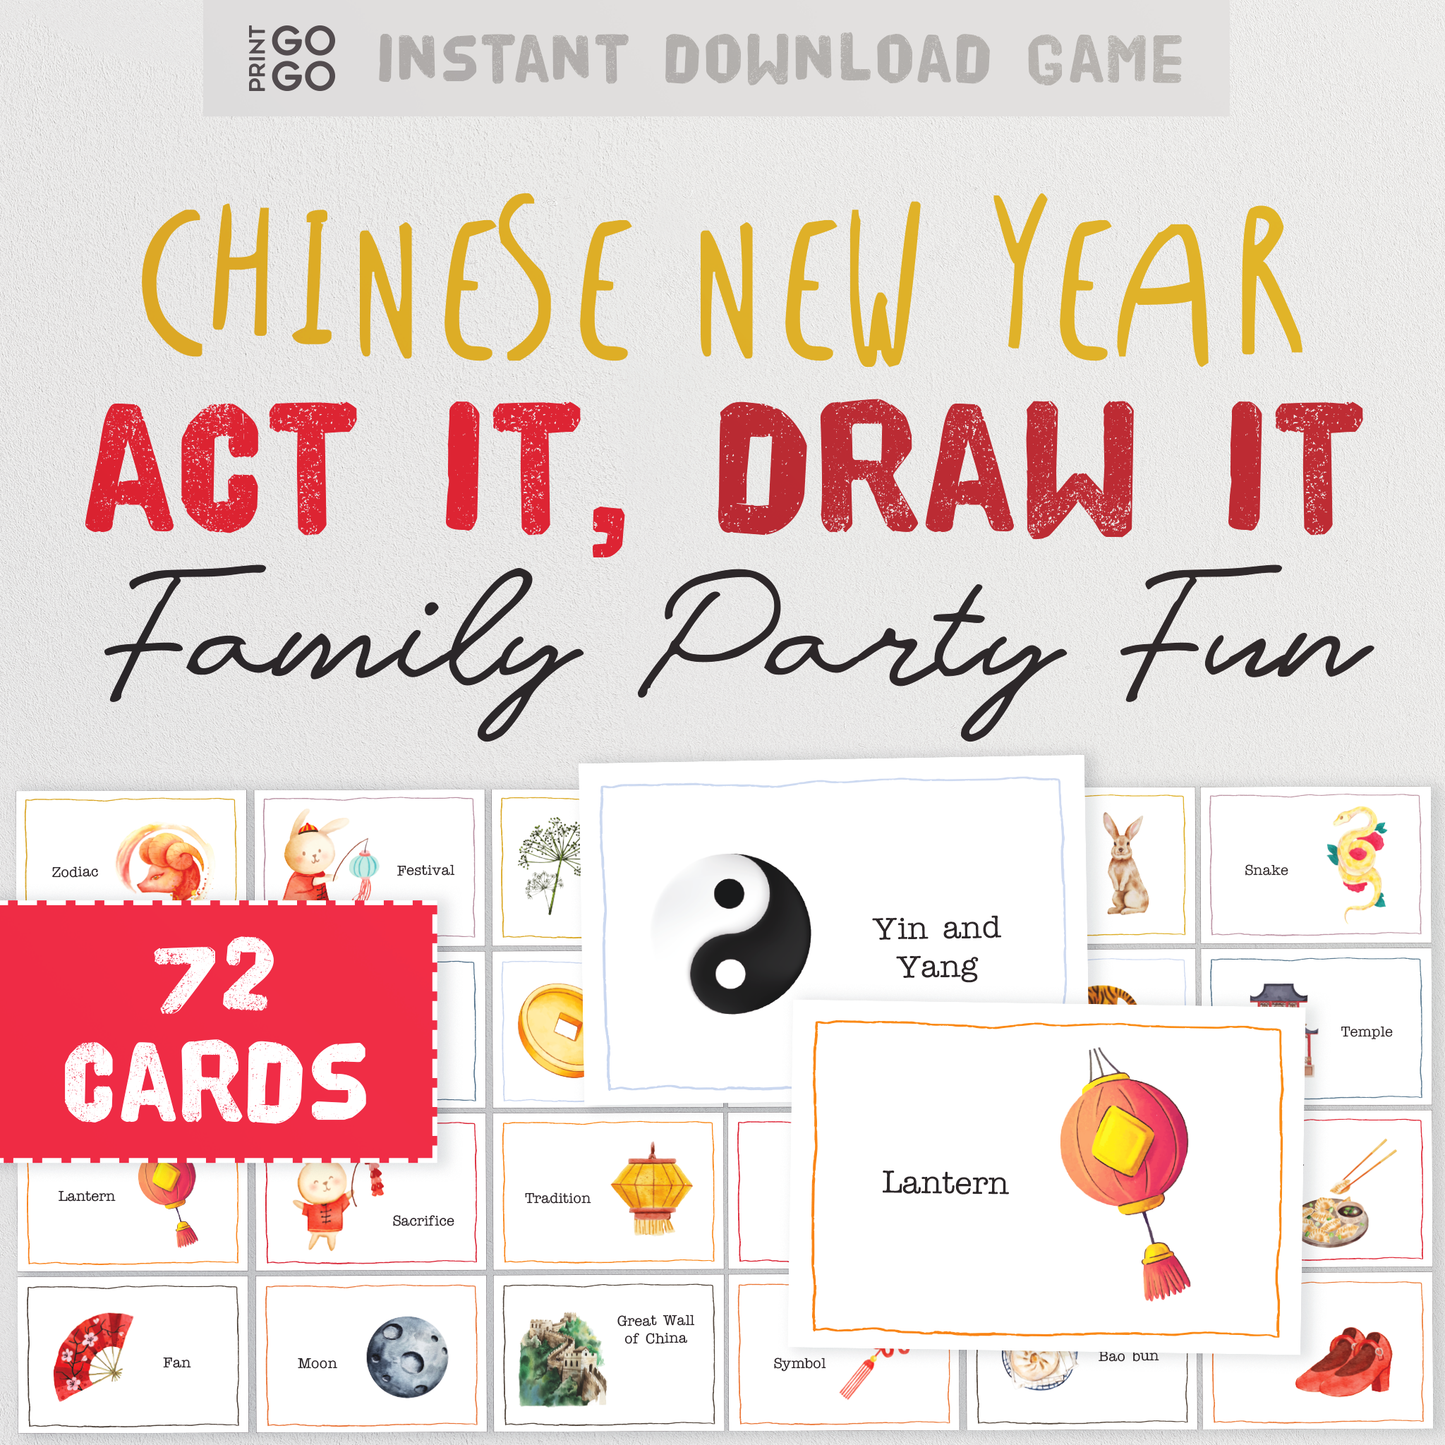 Chinese New Year Act It, Draw It - The Hilarious Family Party Game of Acting Out, Drawing and Guessing Phrases